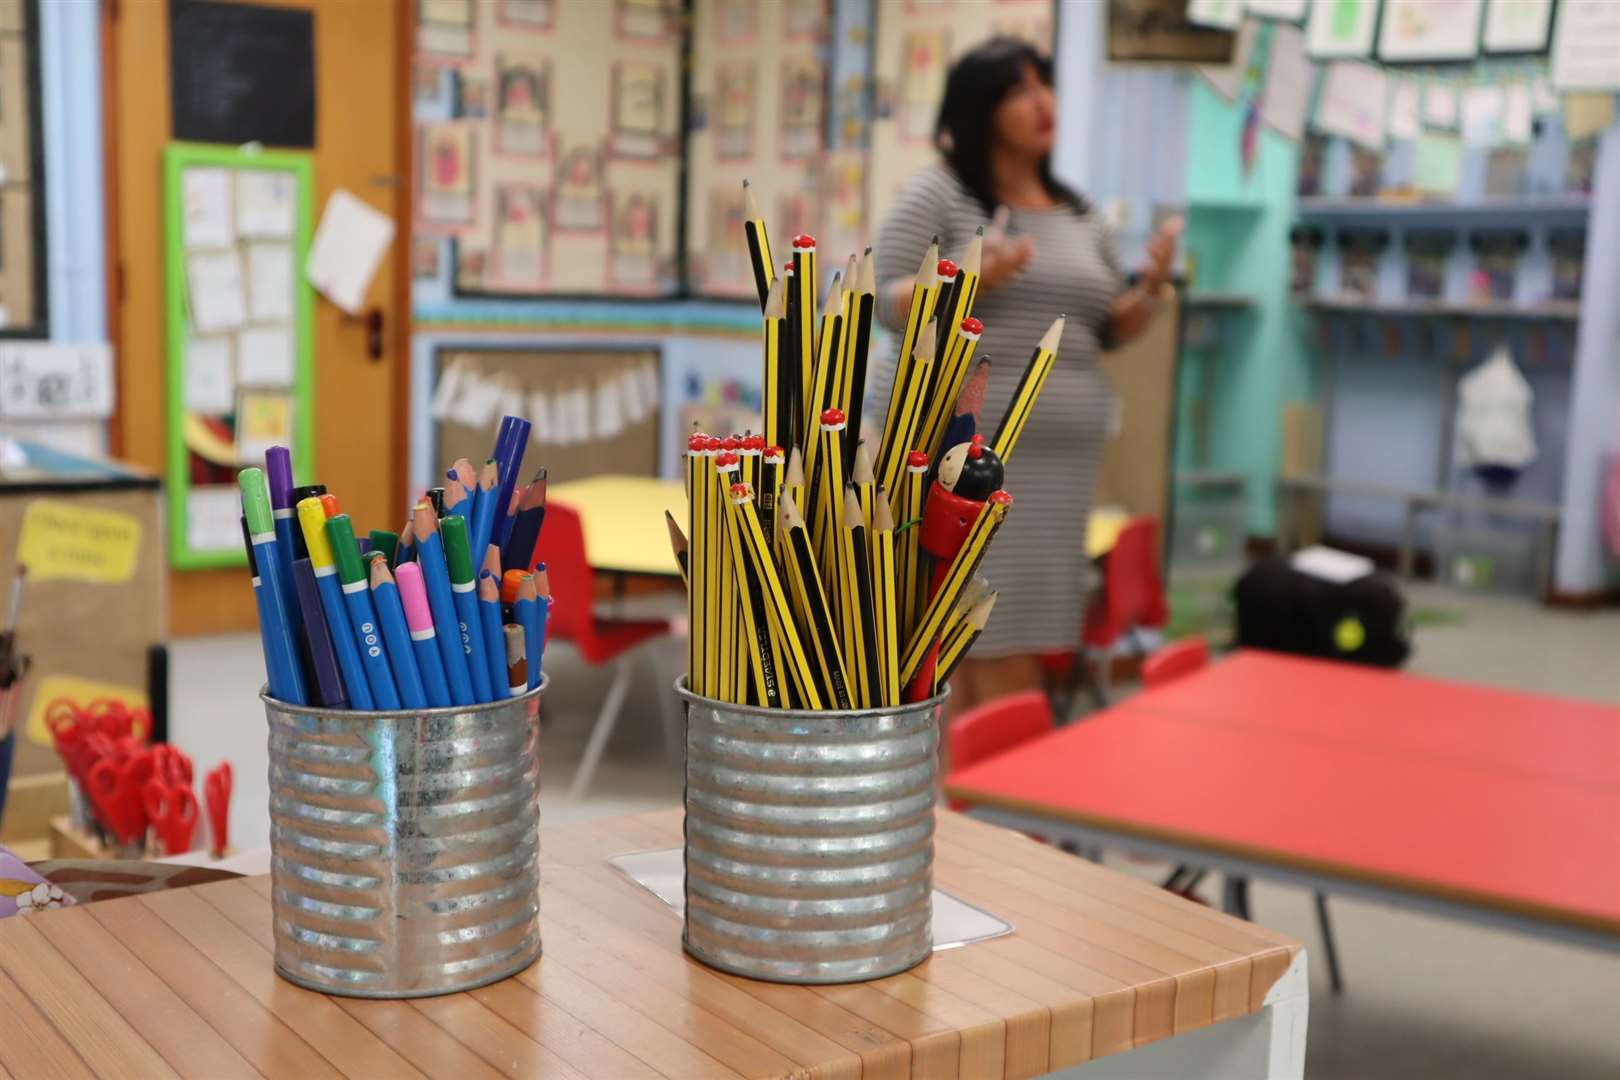 Tins of pencils are outlawed in the new lockdown primary classroom